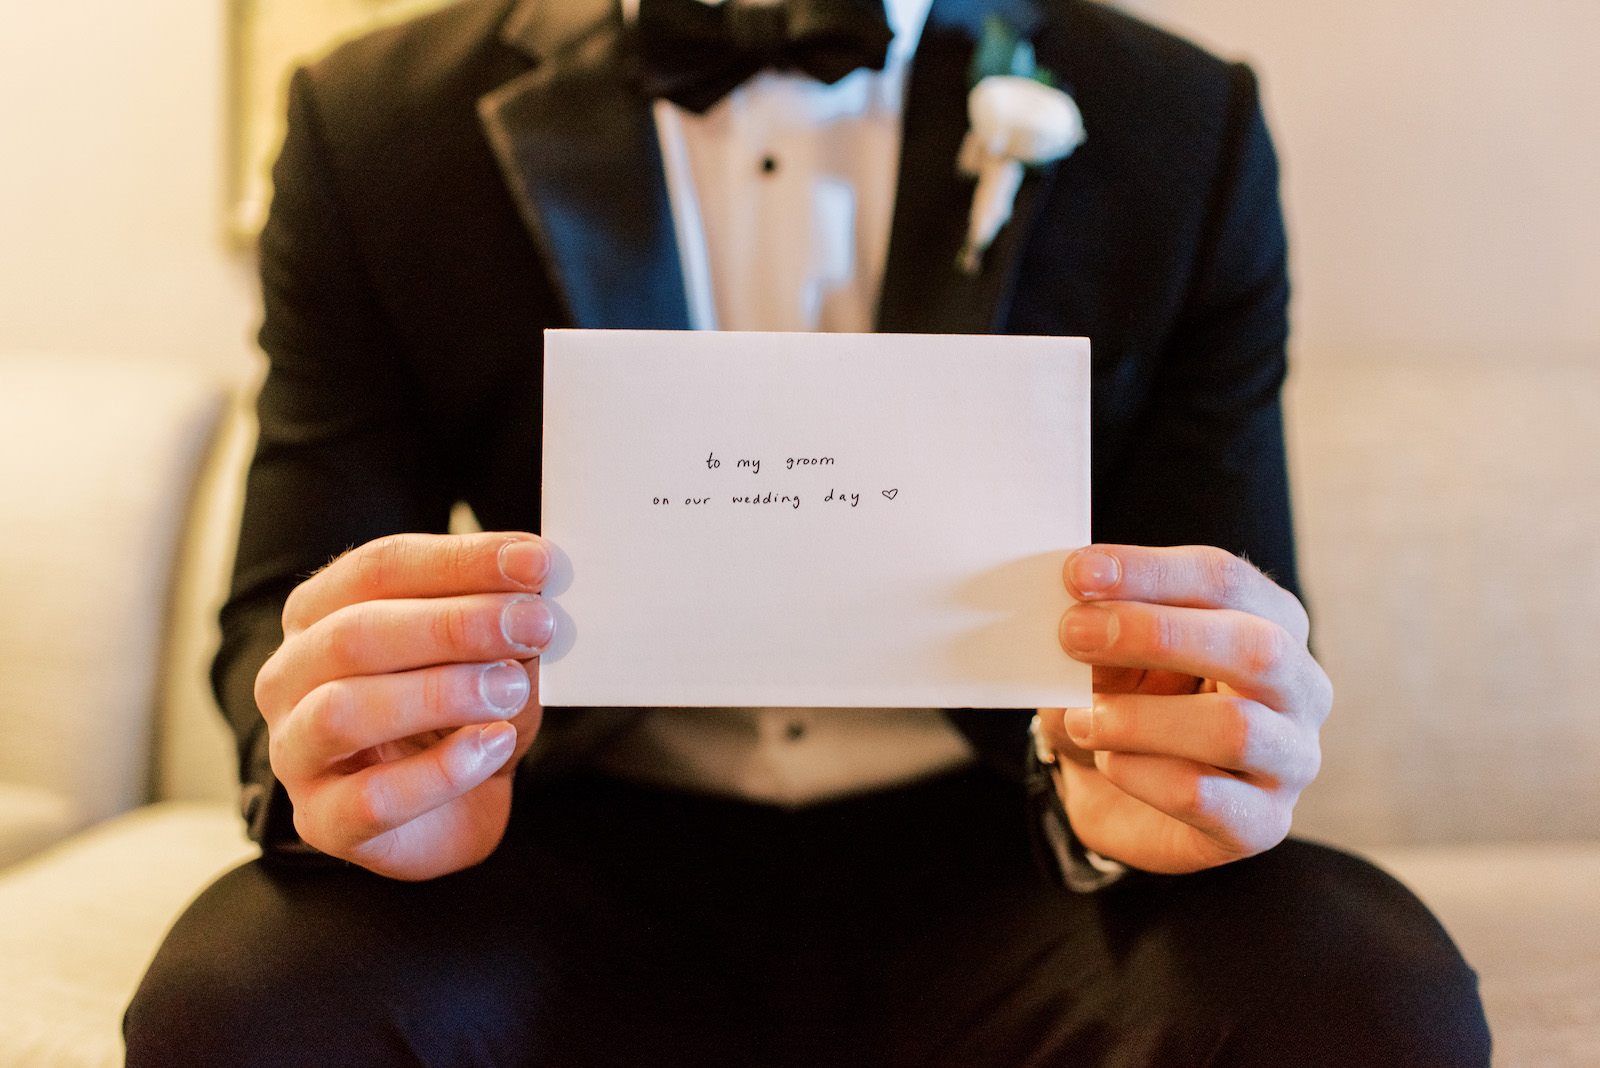 Groom Holding Note From Bride on Wedding Day Portrait in Tuxedo